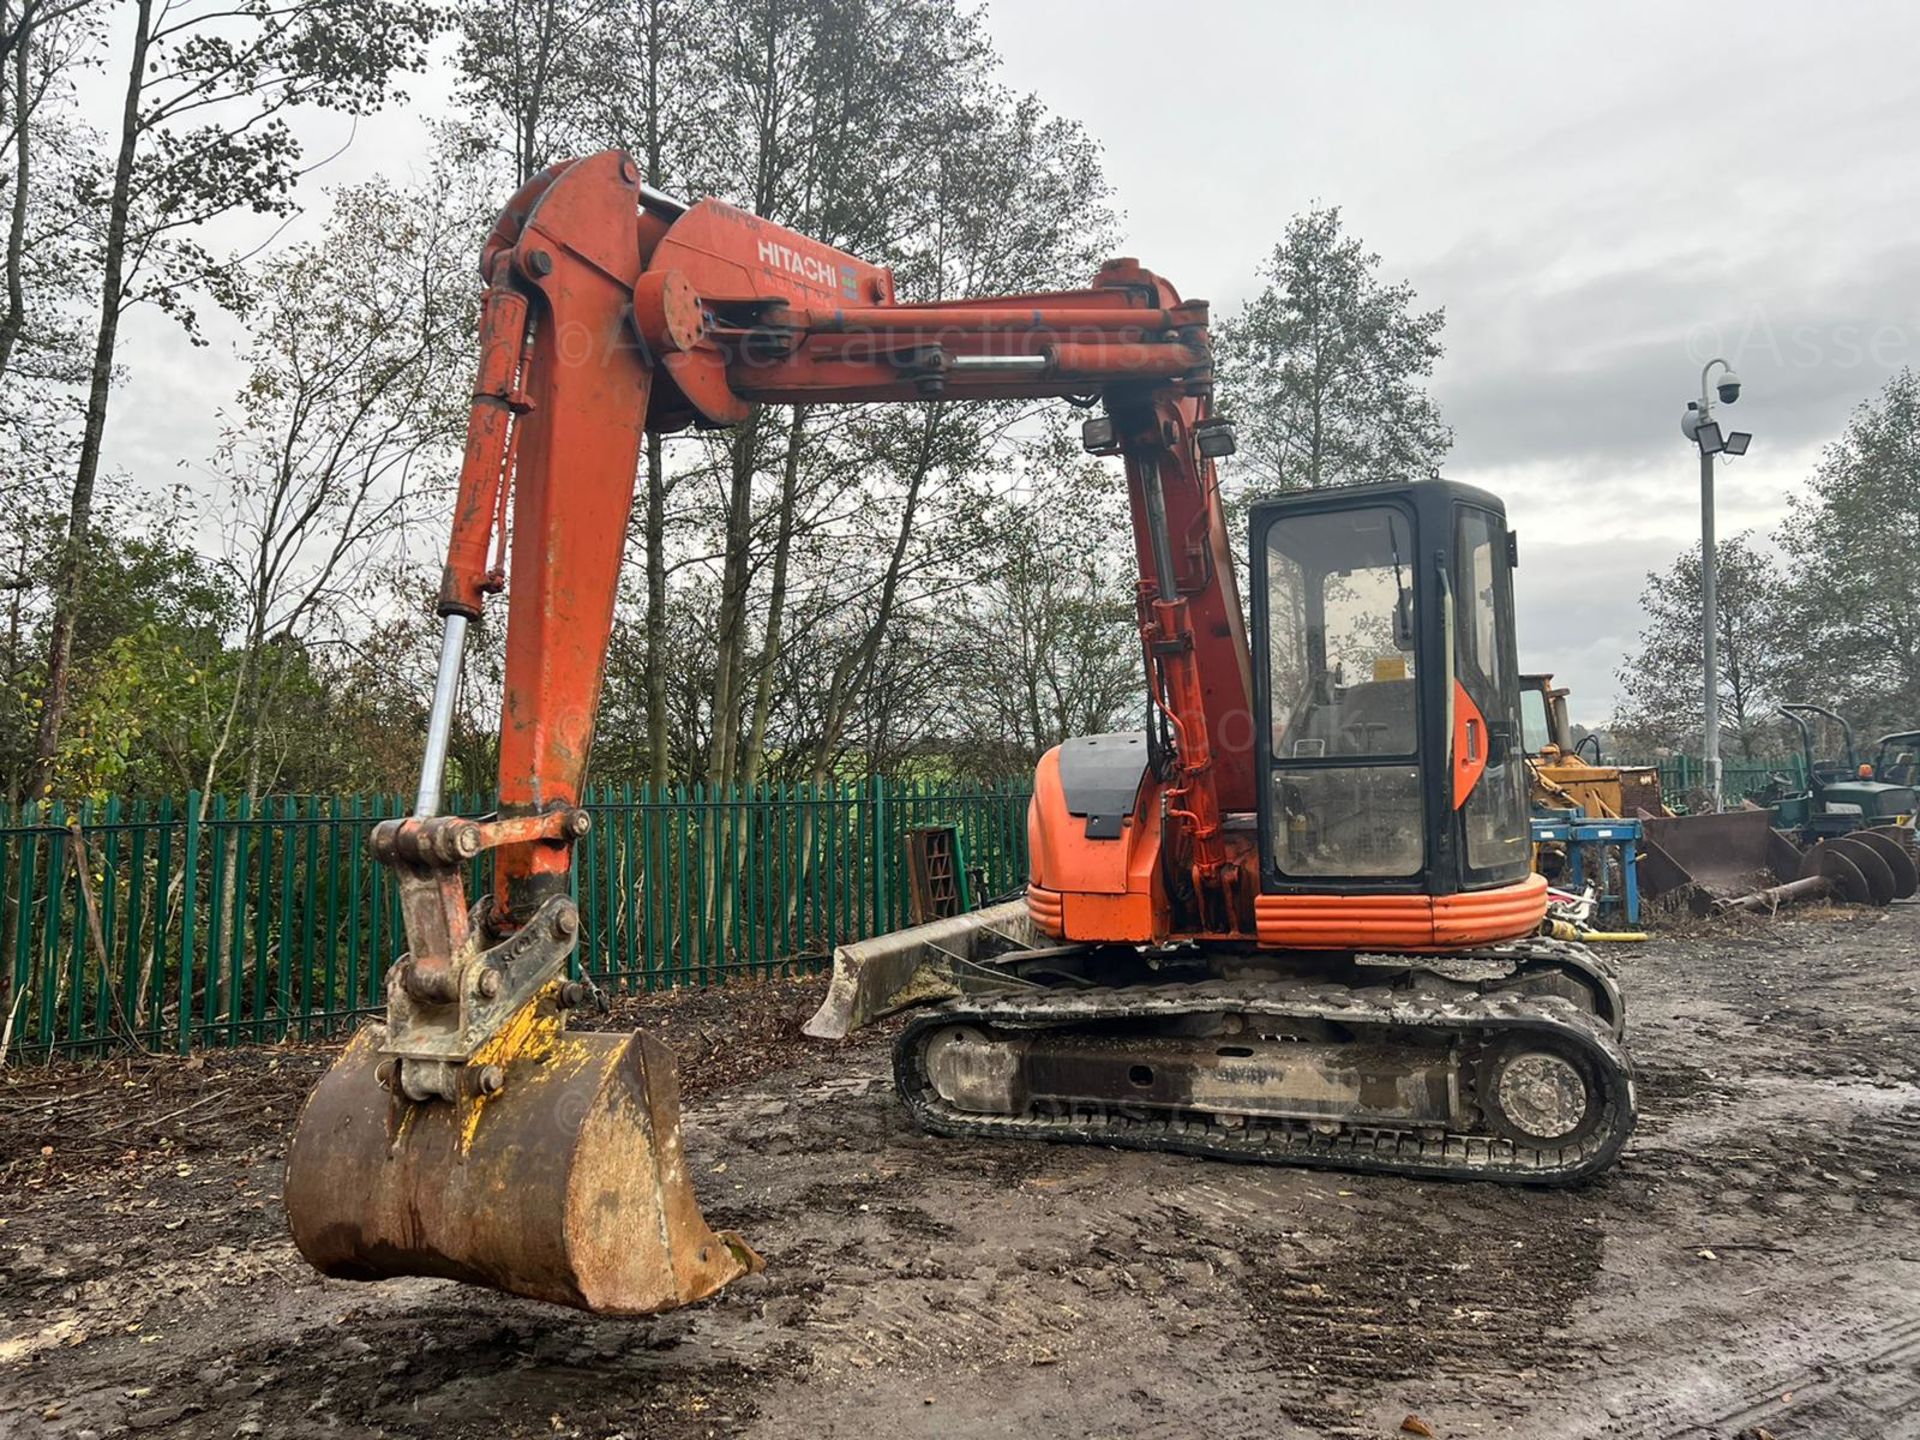 HITACHI EX75UR-3 7.5 TON RUBBER TRACKED EXCAVATOR, RUNS DRIVES AND DIGS, GOOD SET OF TRACKS - Image 3 of 24